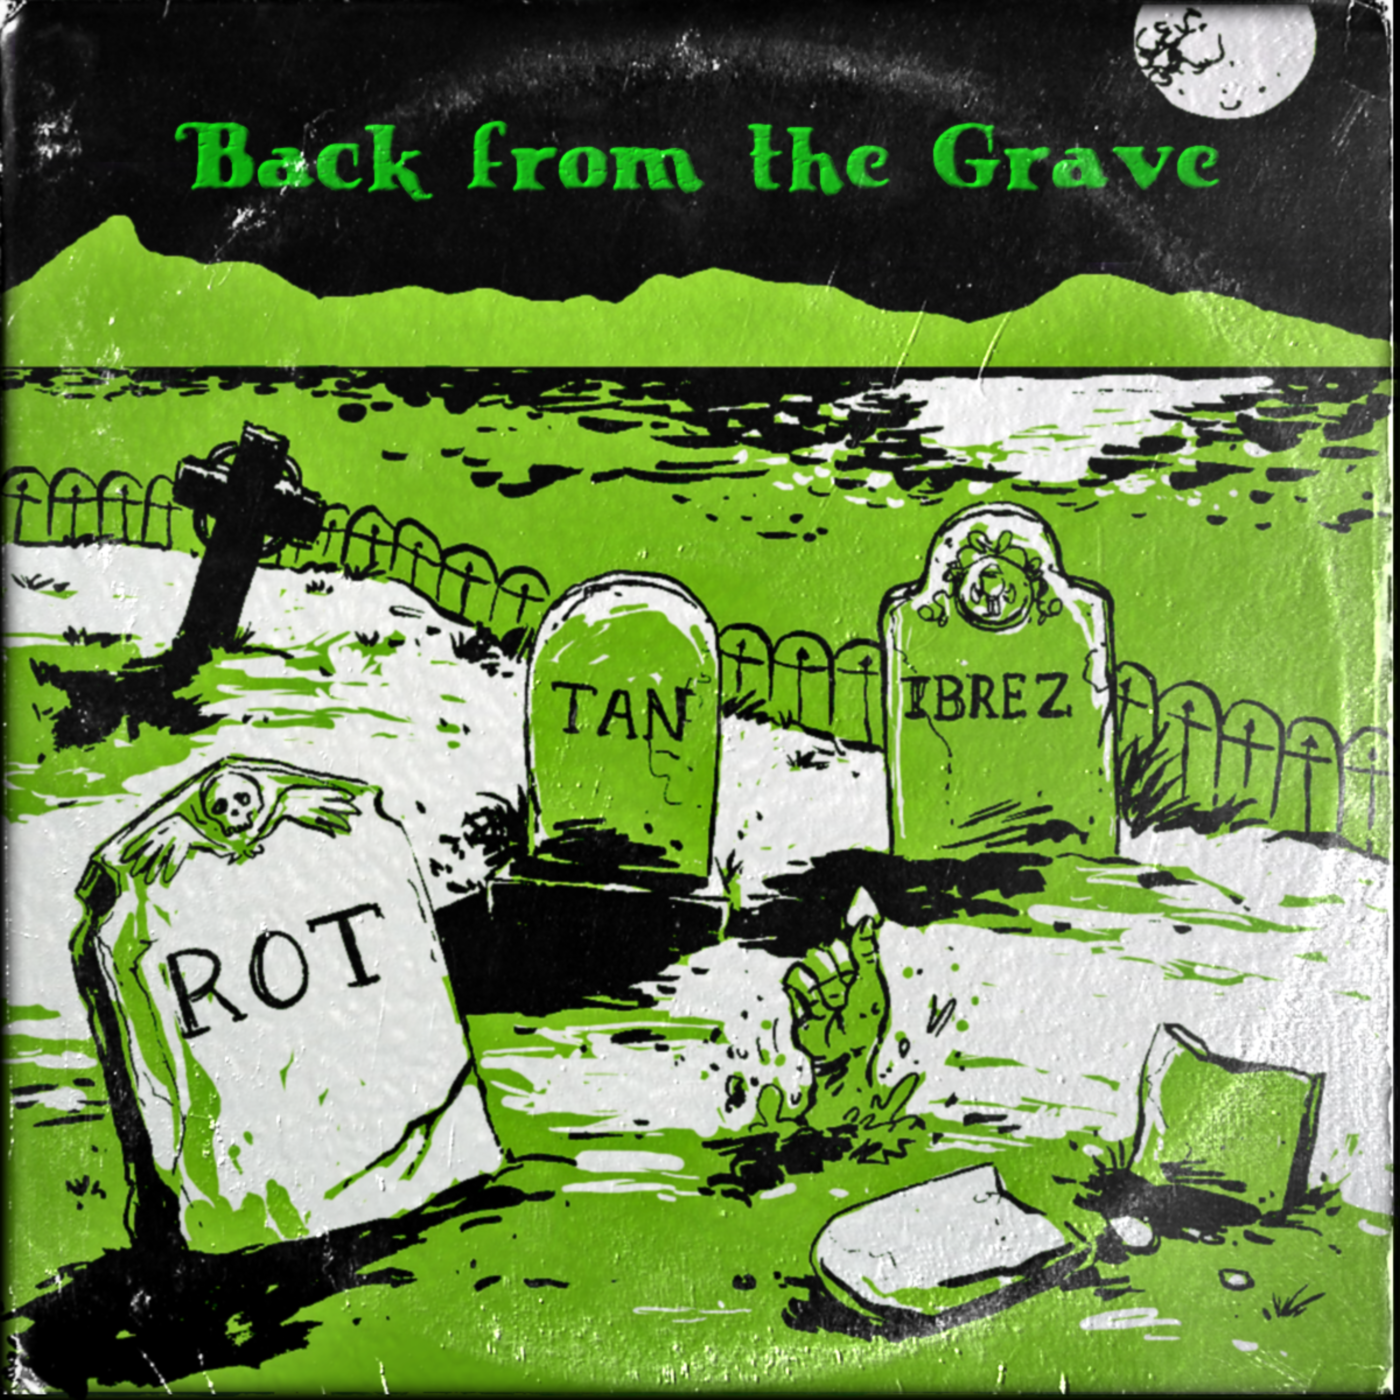 Rottanibrez - Back From The Grave Cover DONE